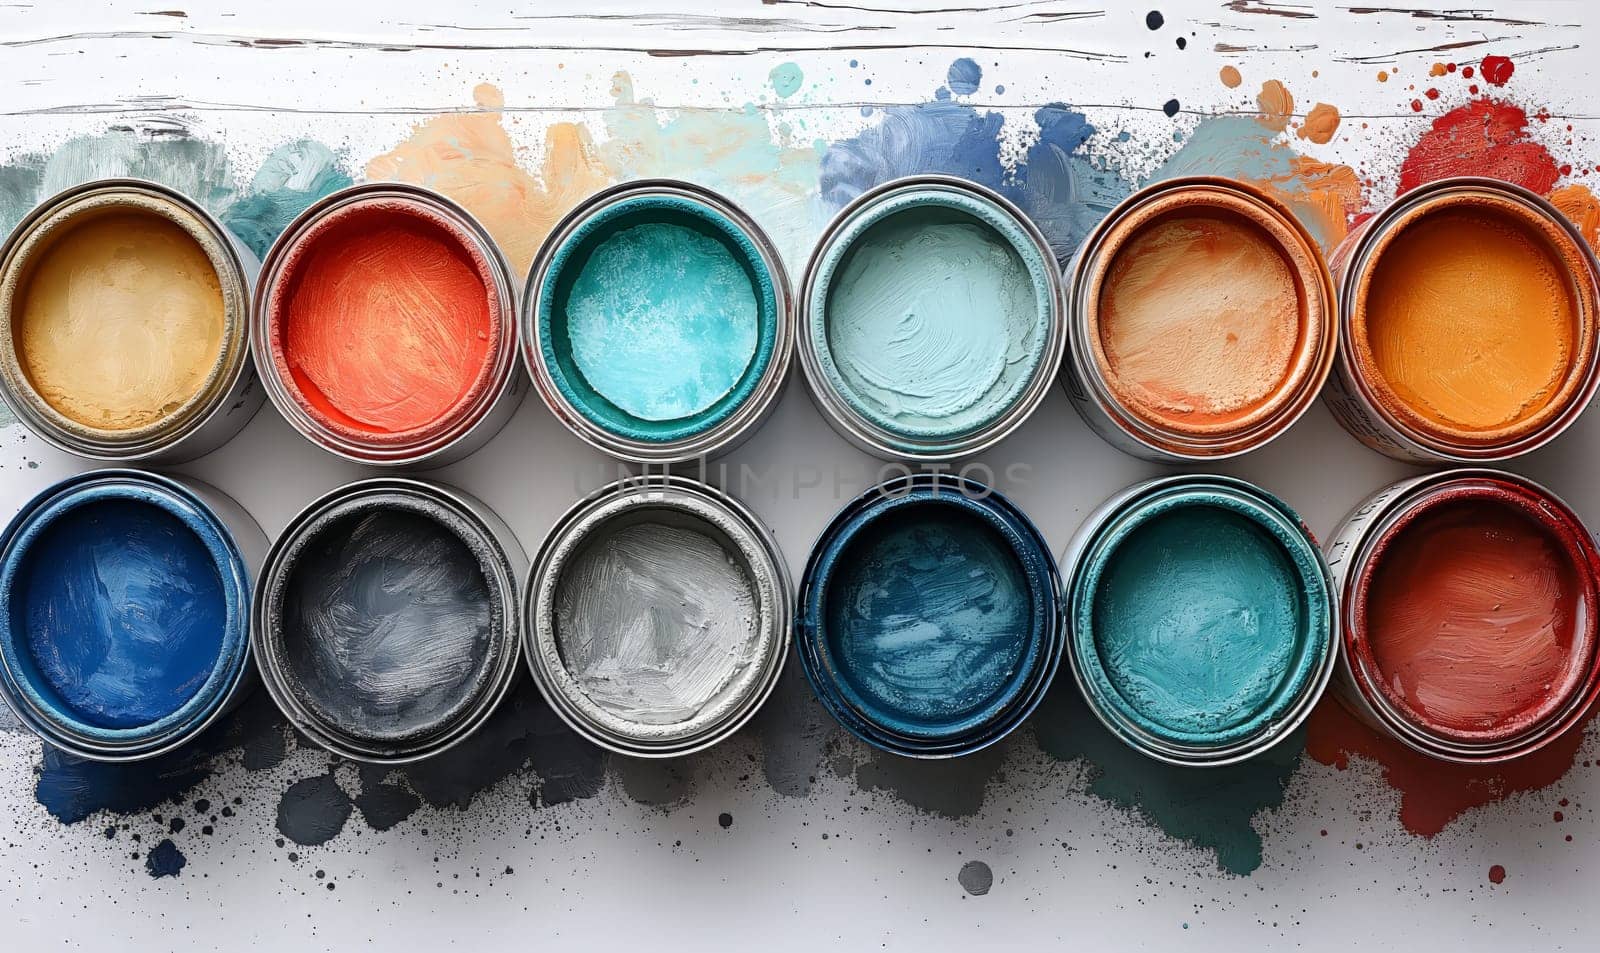 Cans of paint on a white background. by Fischeron